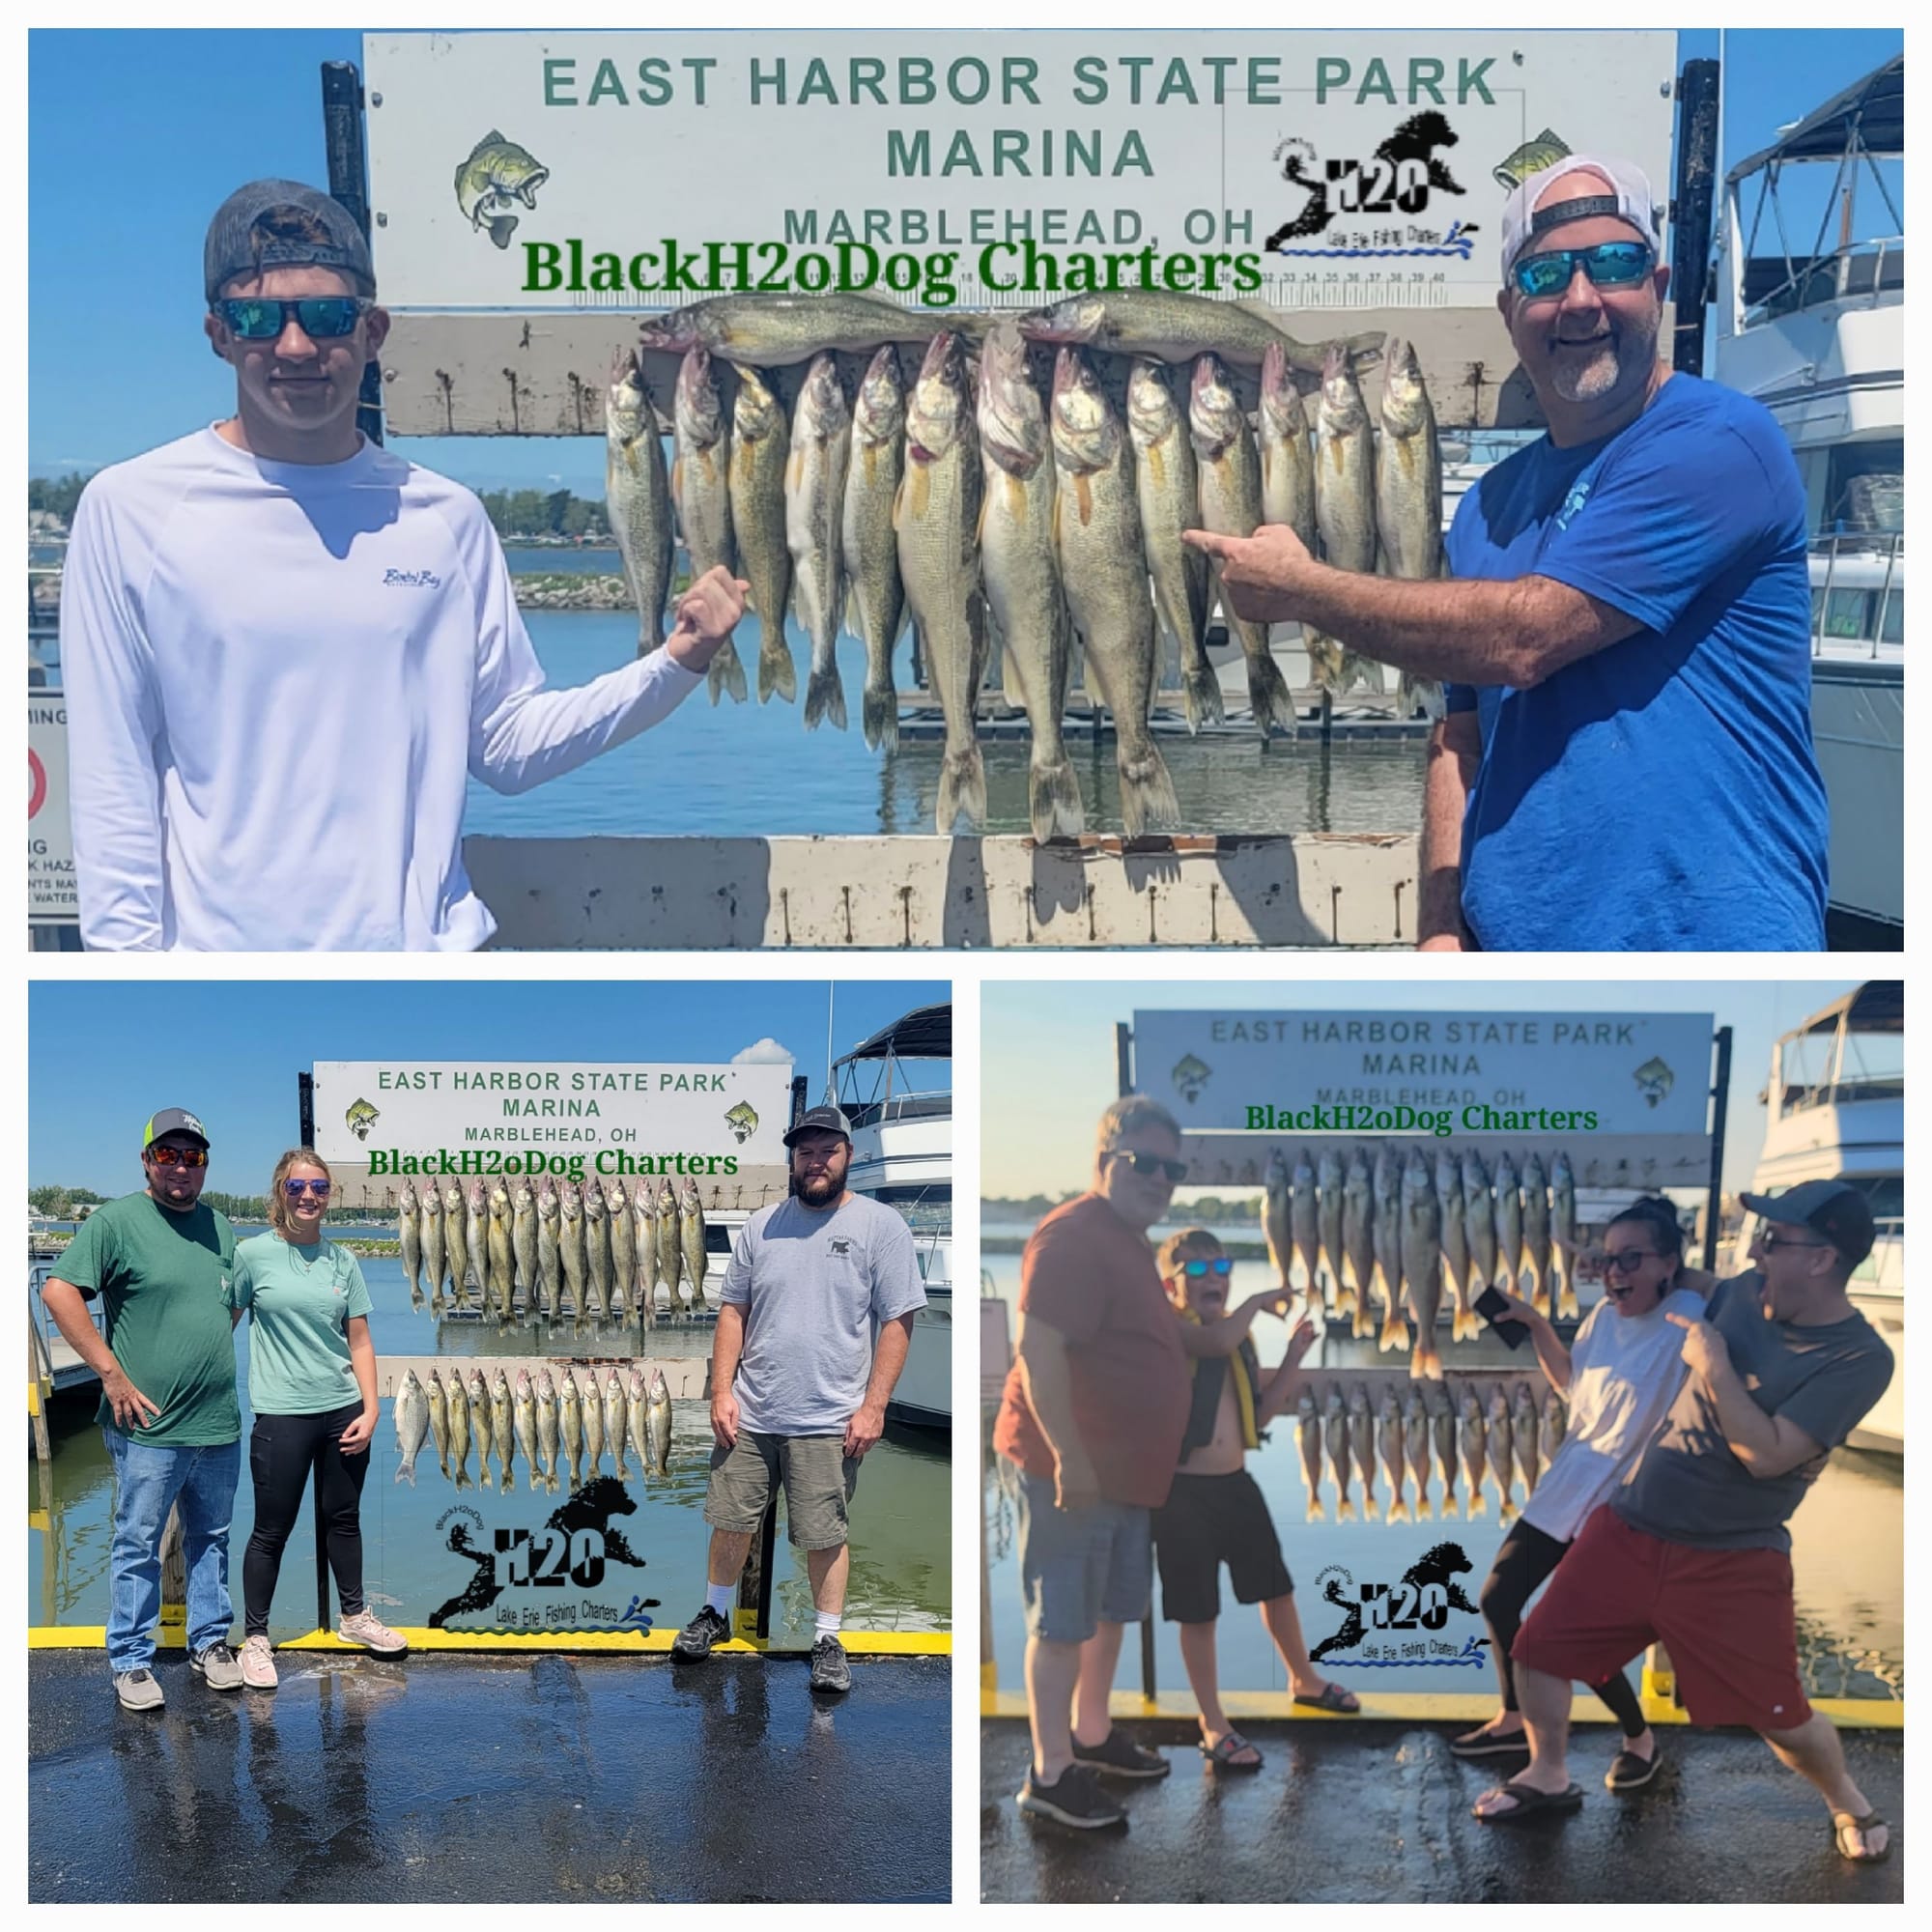 Western Lake Erie fishing report. - Page 122 - The Hull Truth